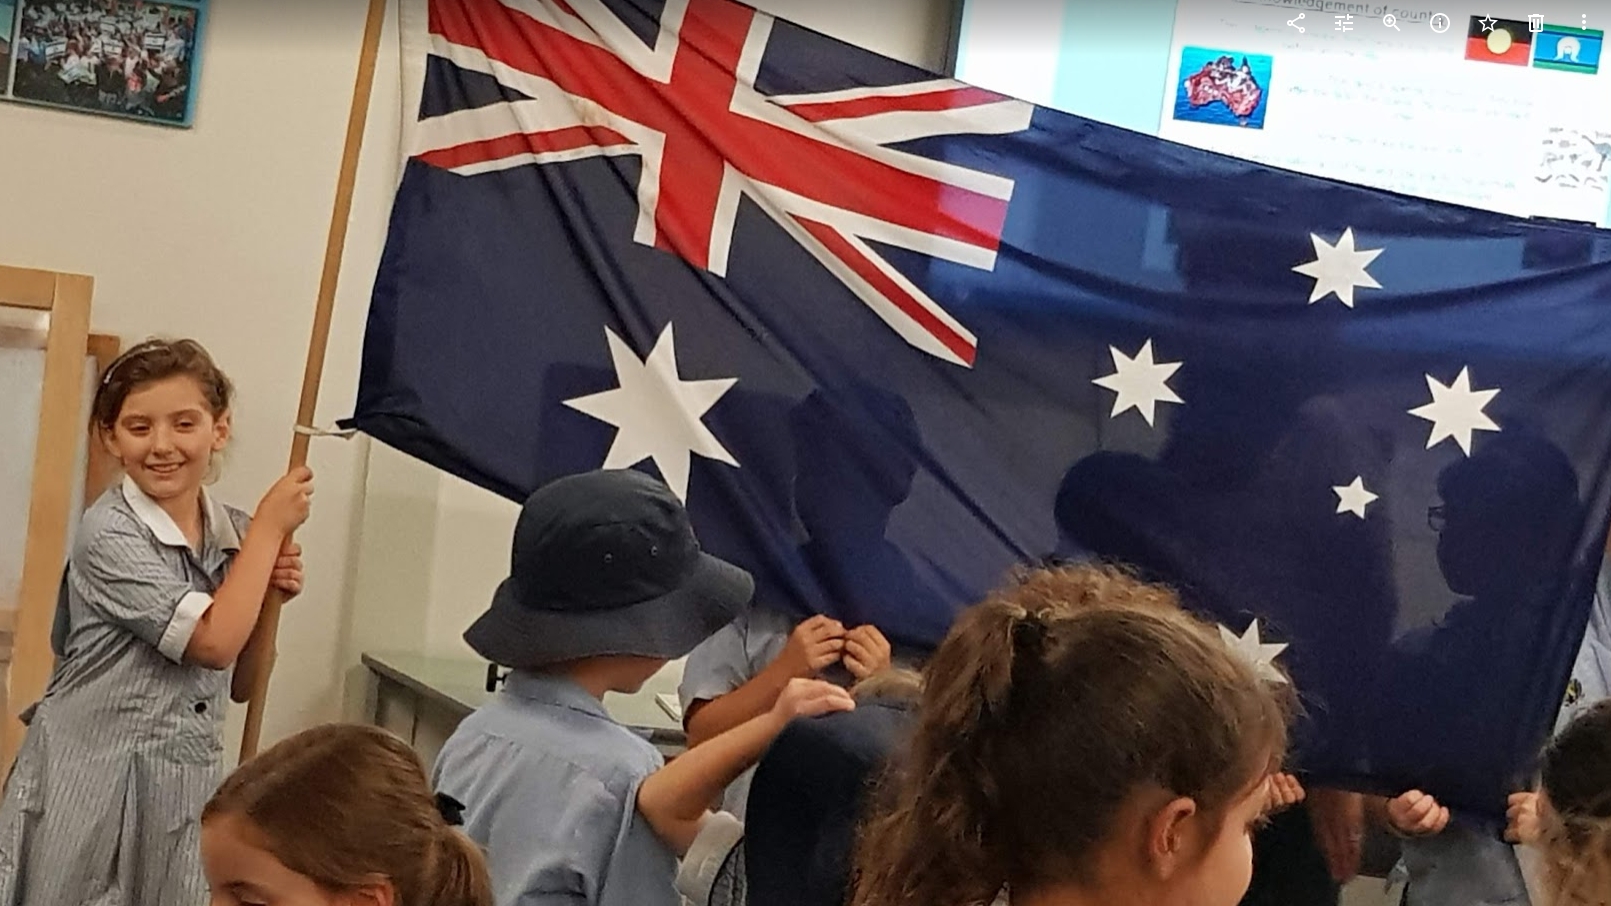 My daughter holding up the Australian 